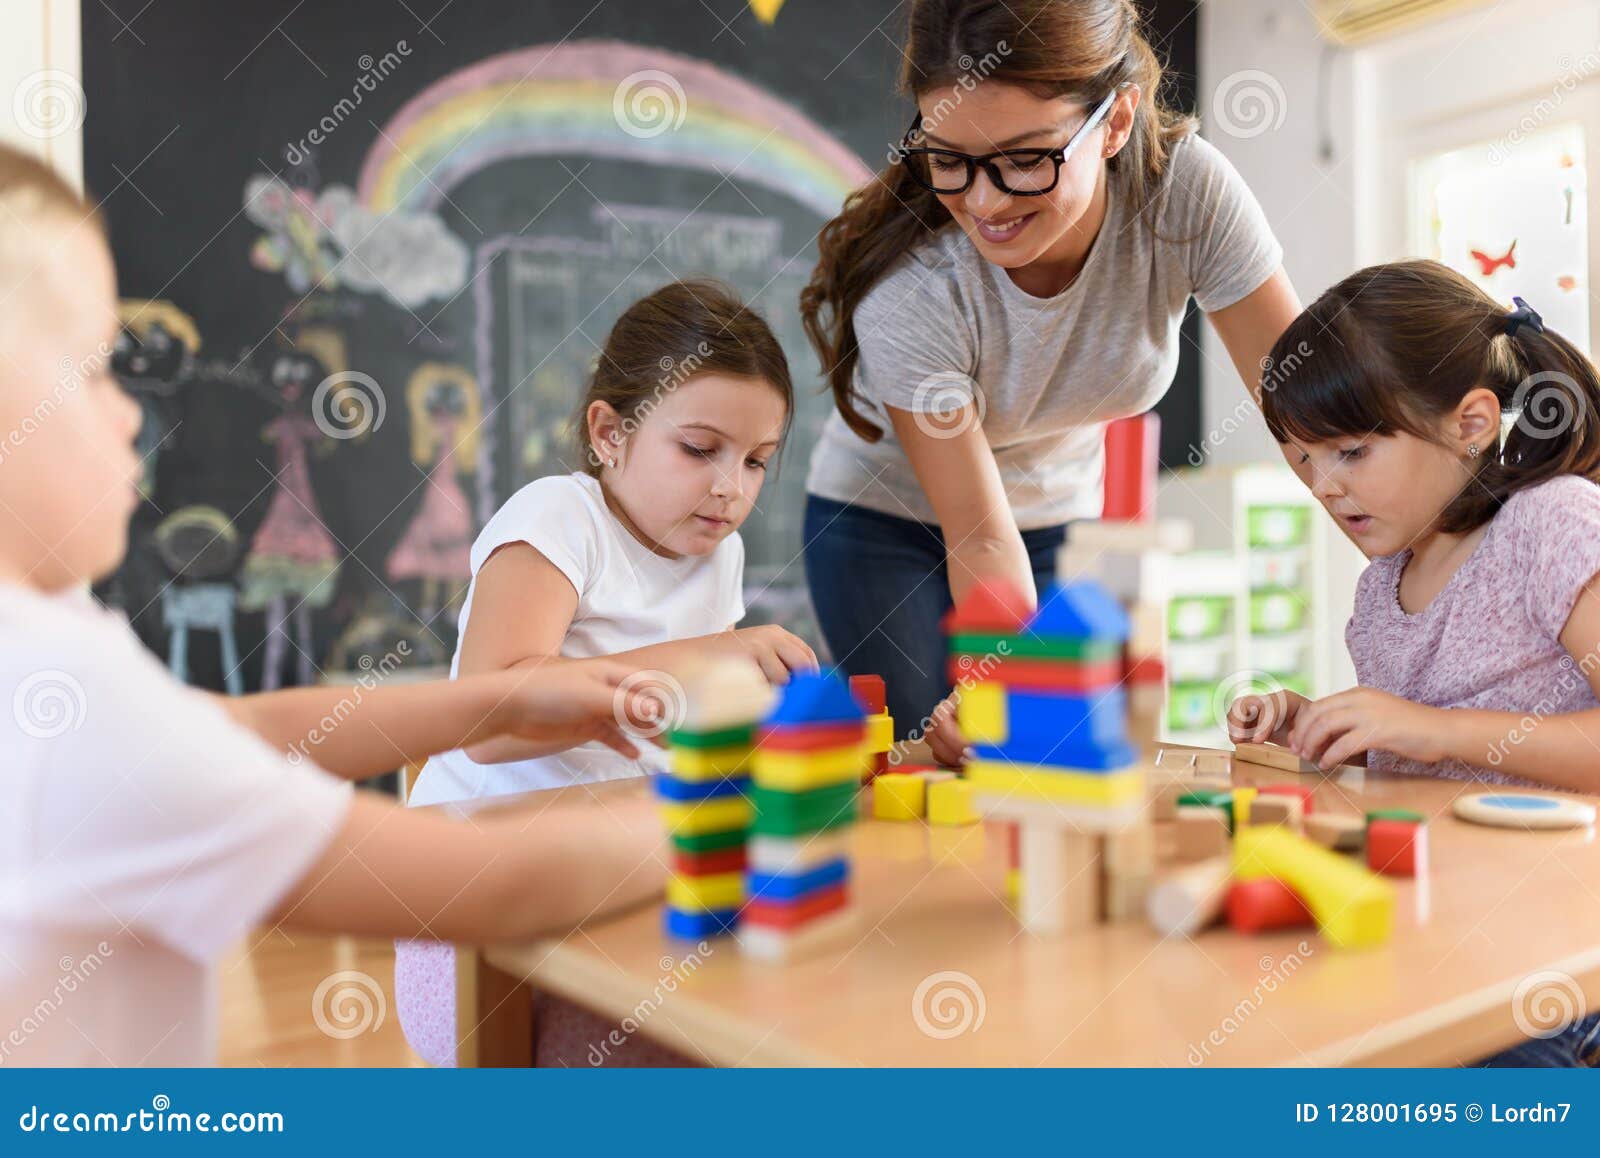 preschool teacher with children playing with colorful wooden didactic toys at kindergarten